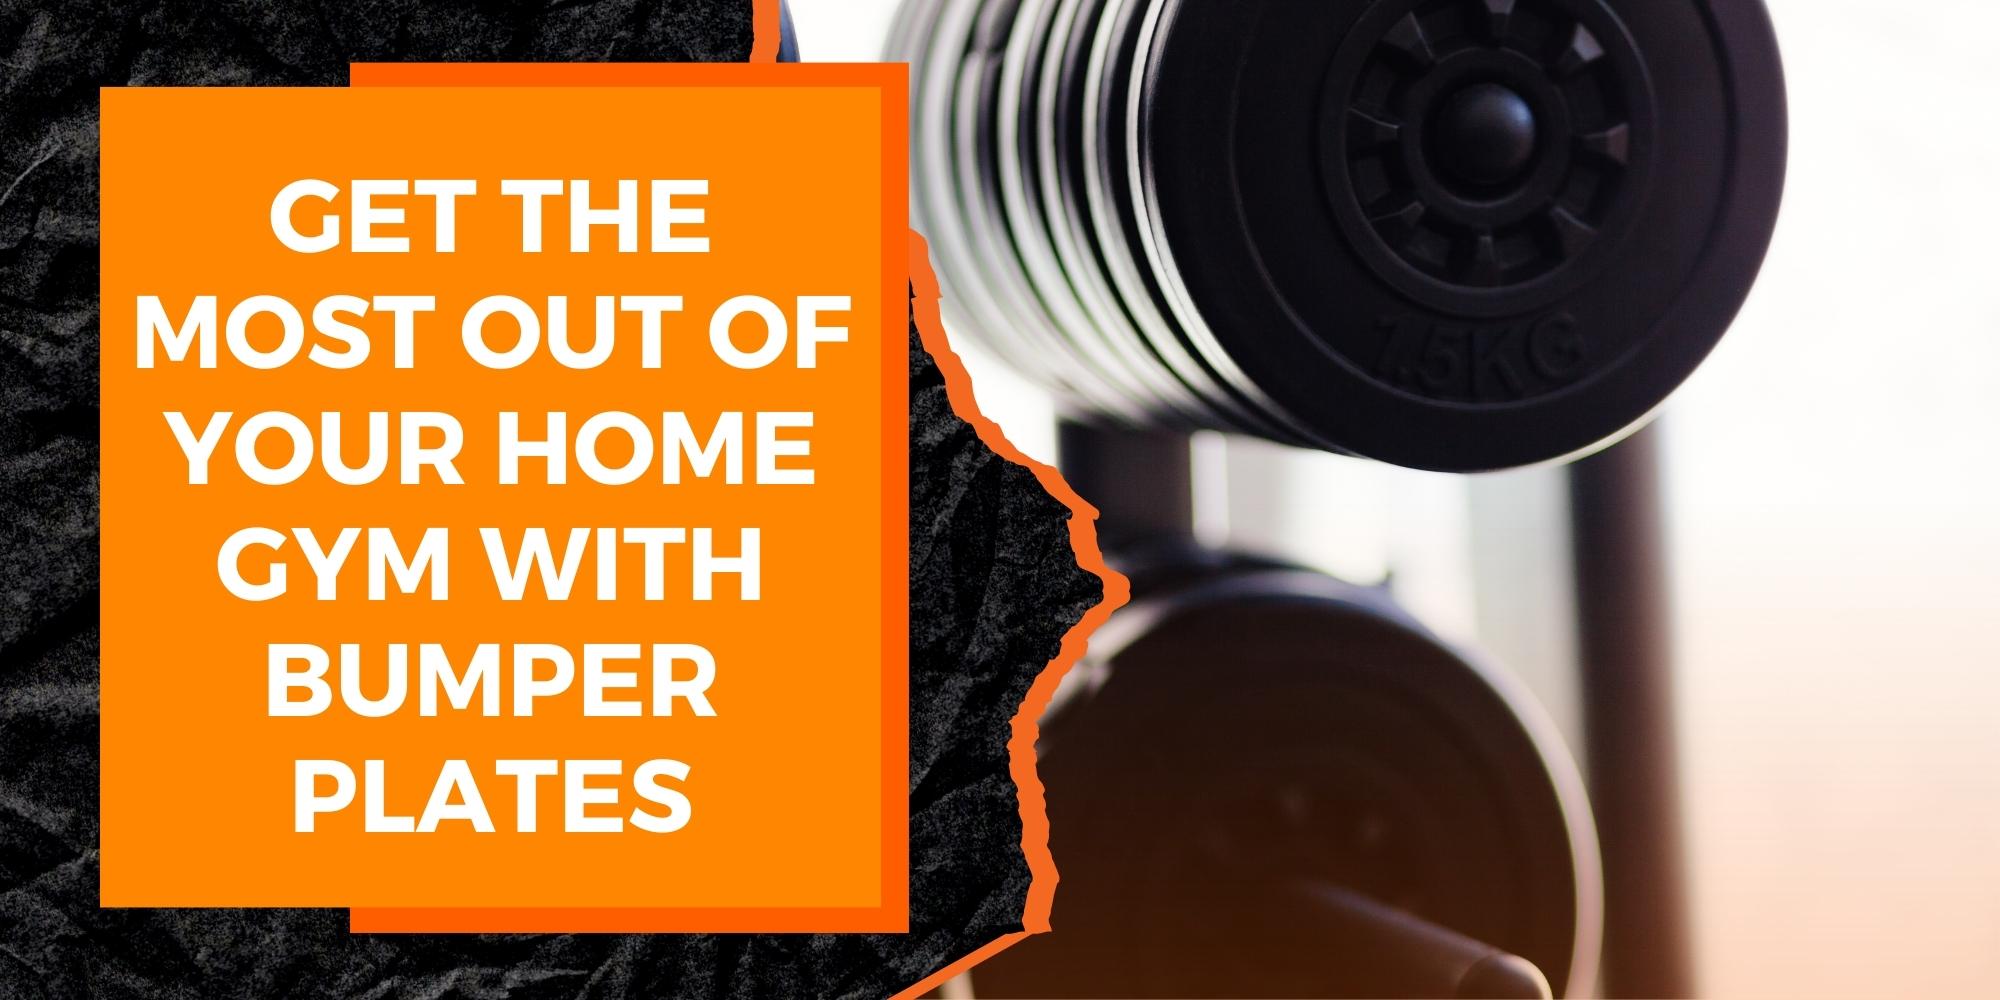 Get the Most Out of Your Home Gym with Bumper Plates